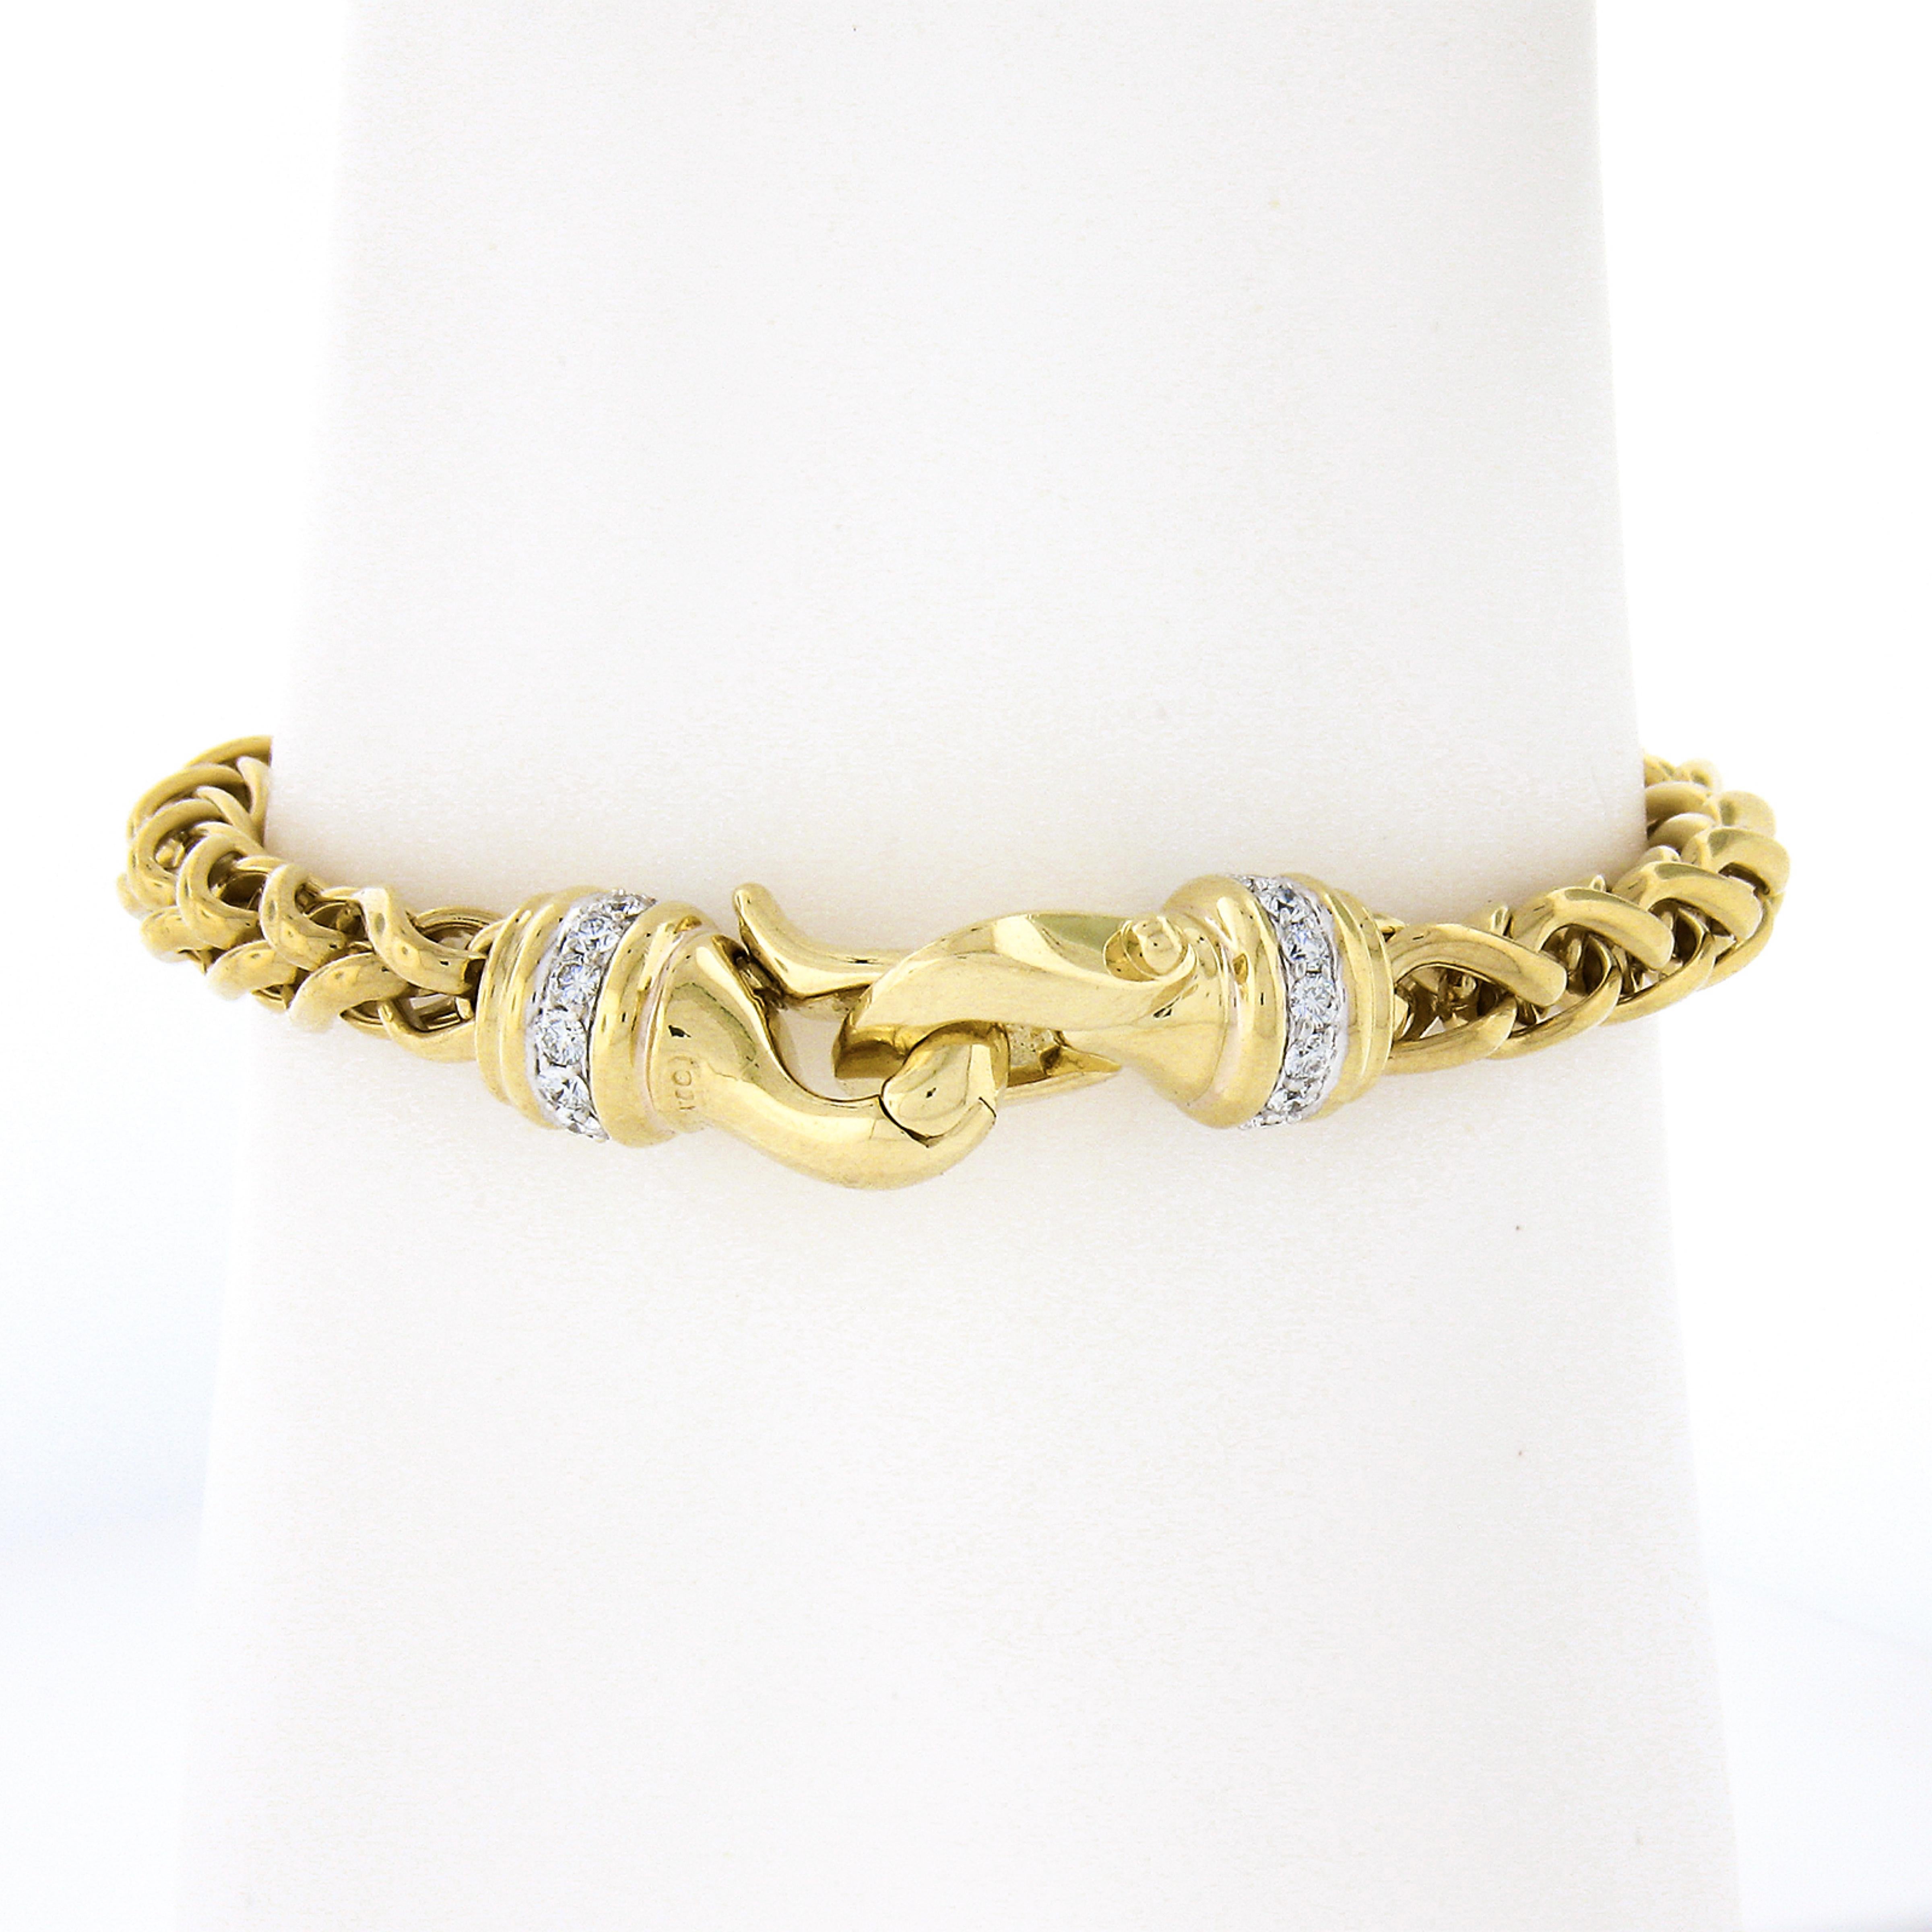 Here we have a beautiful statement bracelet by David Yurman crafted from solid 18k yellow gold. The bracelet features wheat link chain in which is polished finish. This bracelet shows a nice bold look on the wrist and is secured with a buckle clasp